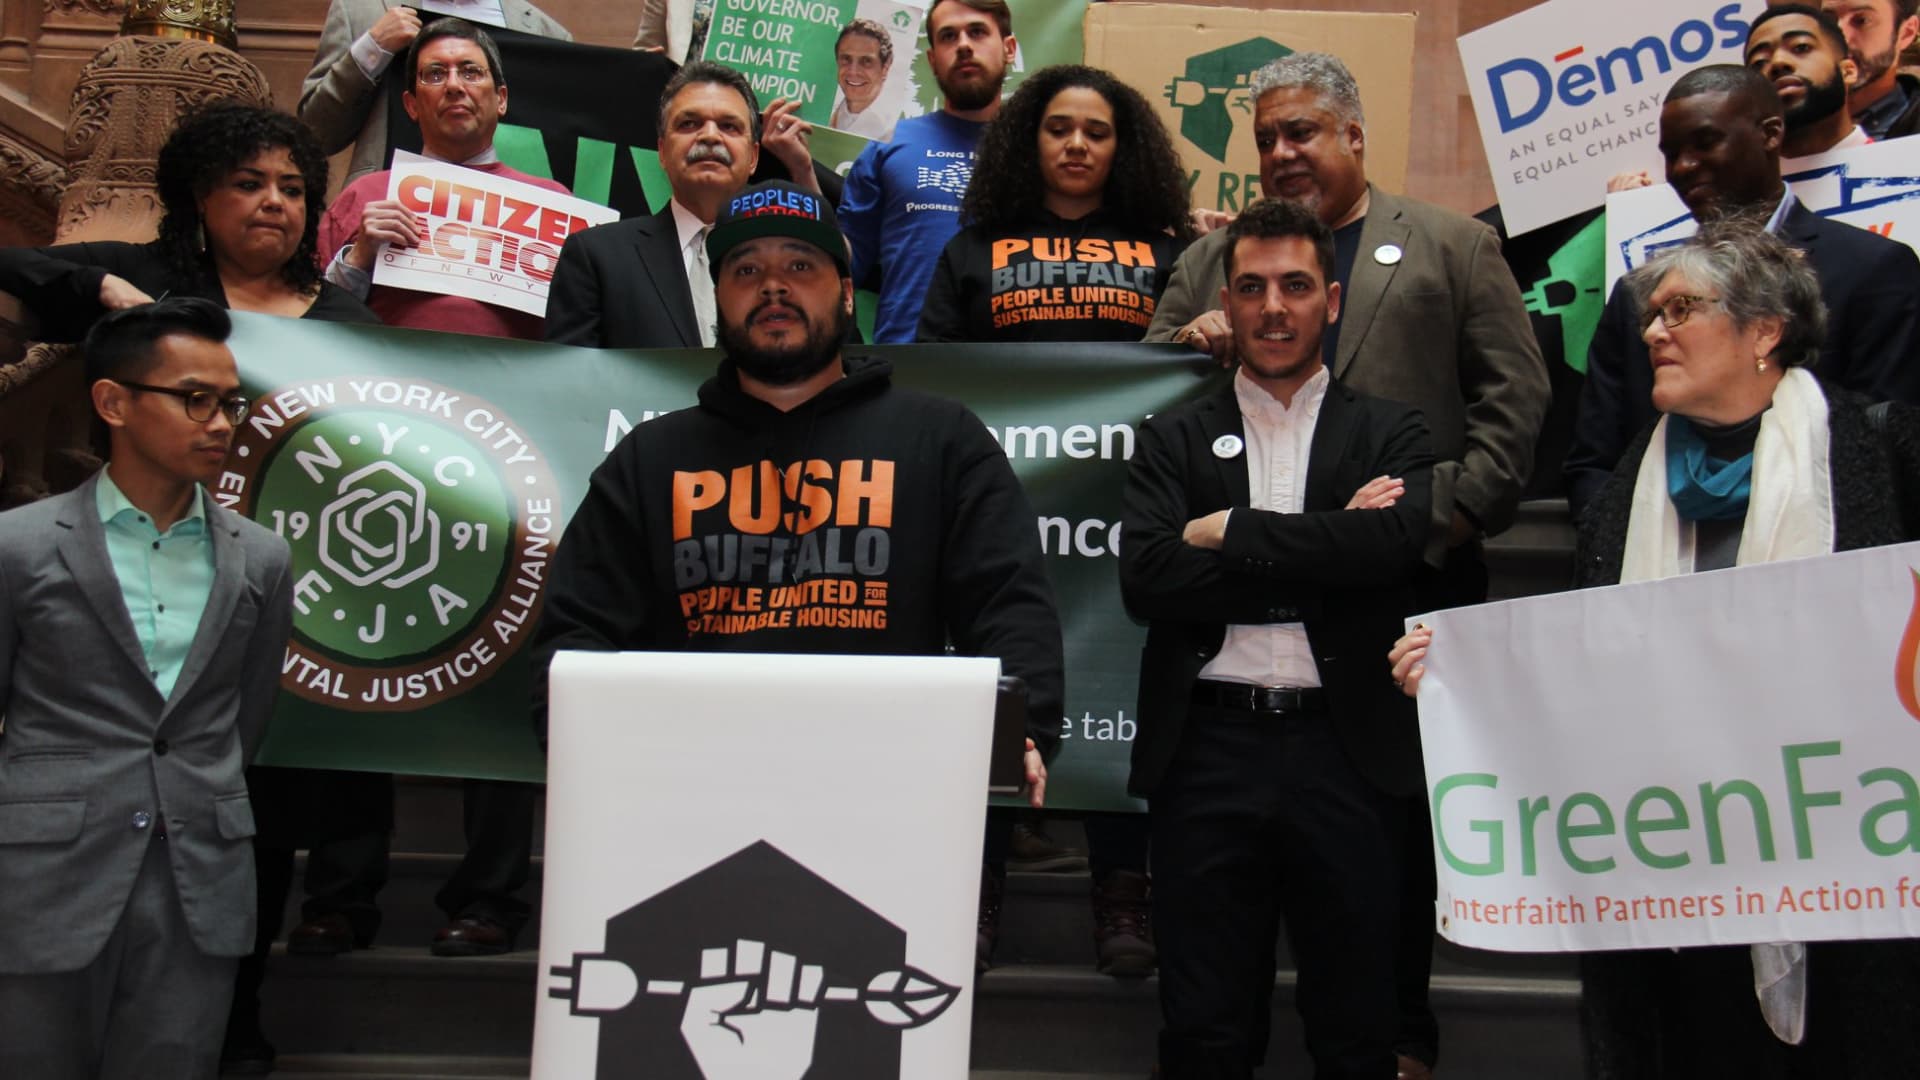 Daniel Sherrell (front row arms crossed) at a press conference with the NY Renews coalition, advocating for the passage of a climate bill, the Climate Leadership and Community Protection Act of 2019.